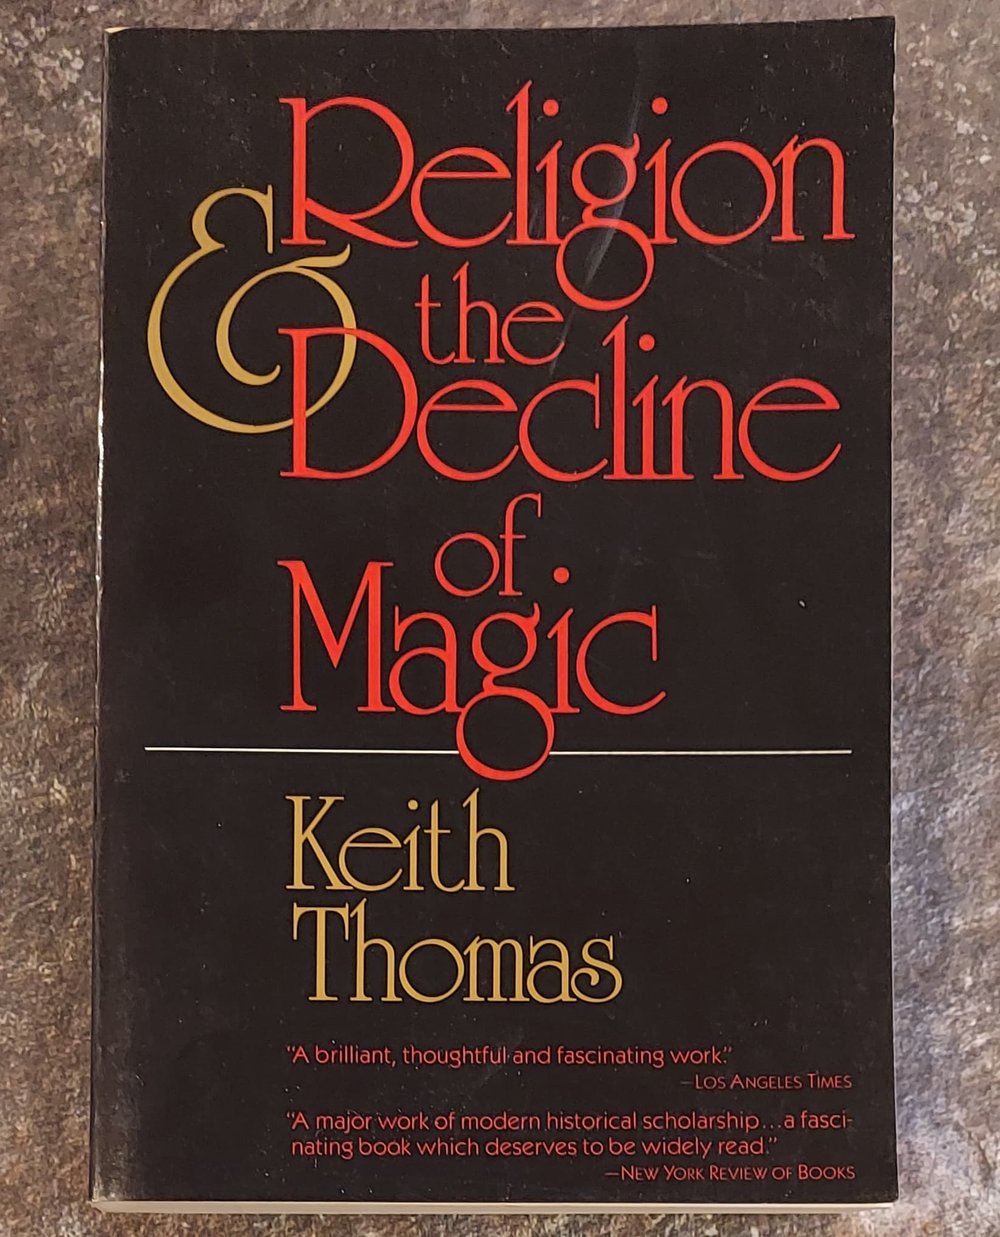 Religion and the Decline of Magic, by Keith Thomas